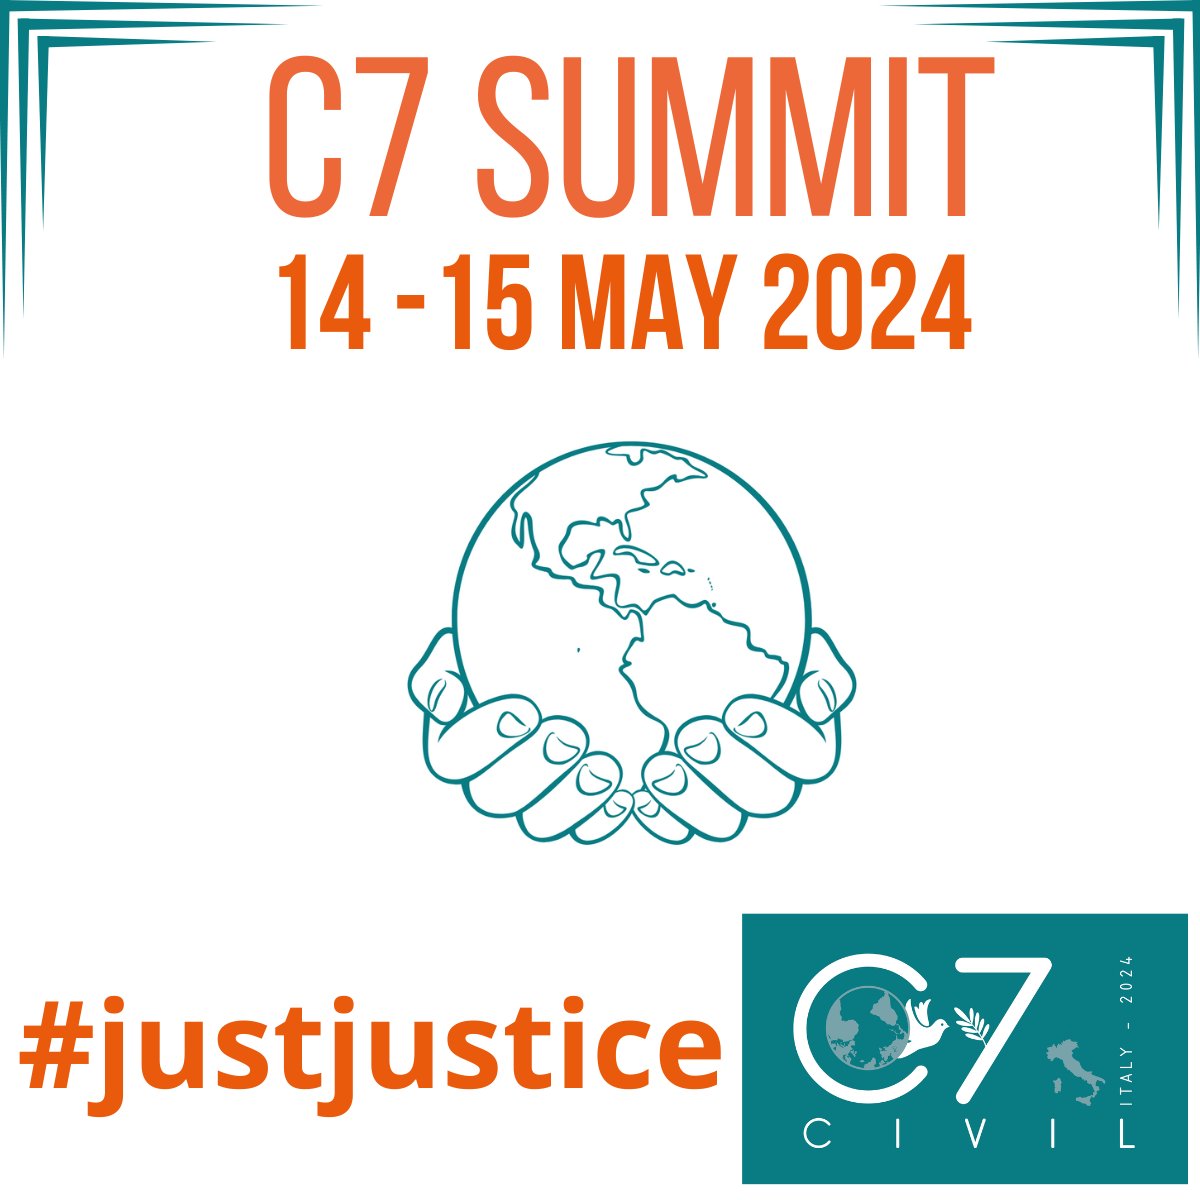 🟦 #𝗷𝘂𝘀𝘁𝗷𝘂𝘀𝘁𝗶𝗰𝗲. We look forward to the exciting experience of the C7 Summit in Rome. There are still a few days left. STAY TUNED 😊
#civil72024, #civil7italy, #civil7ita, #g7ita, #g72024, #G7Italy, #g72024